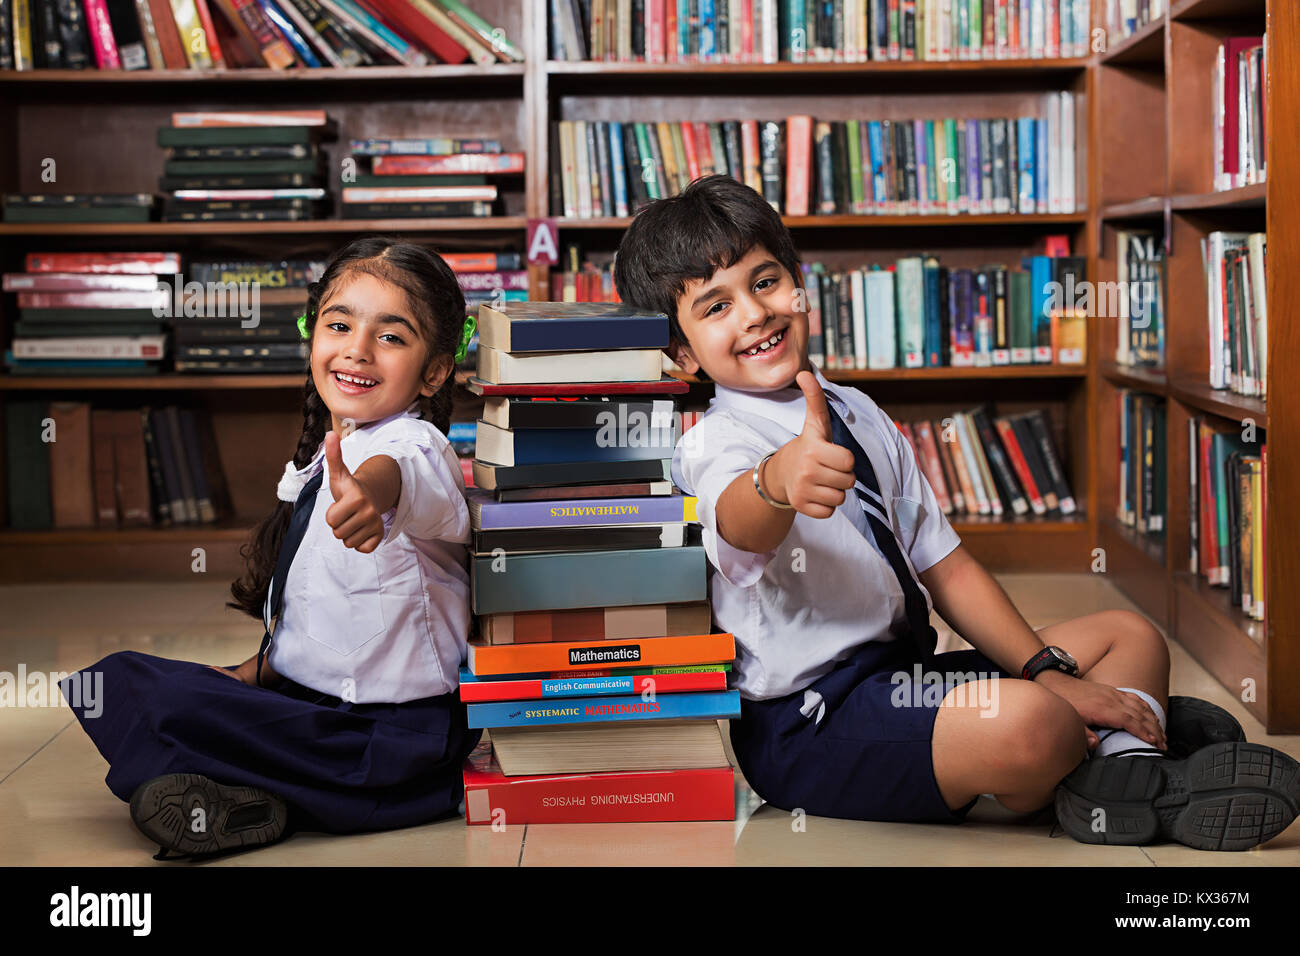 2 Indian School Students Showing Thumbs up With Books In Library Stock Photo